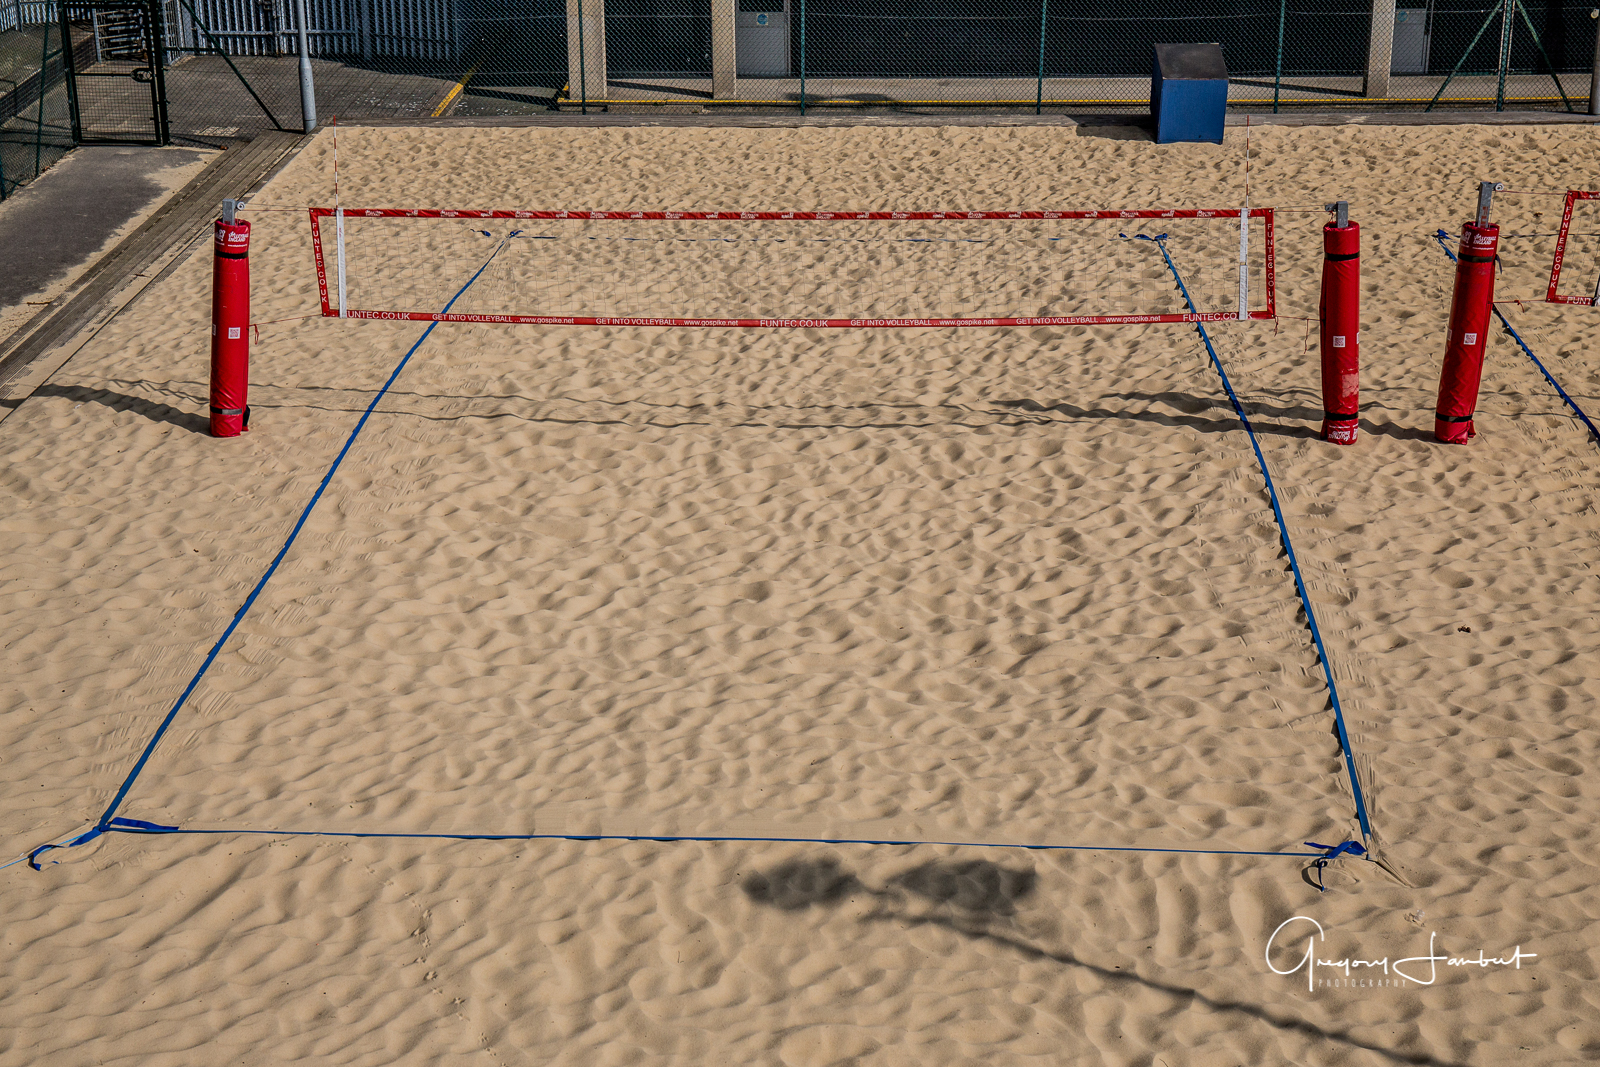 20170327_Bromley_Crystal-Palace-Park_Lets-play-beach-volleyball